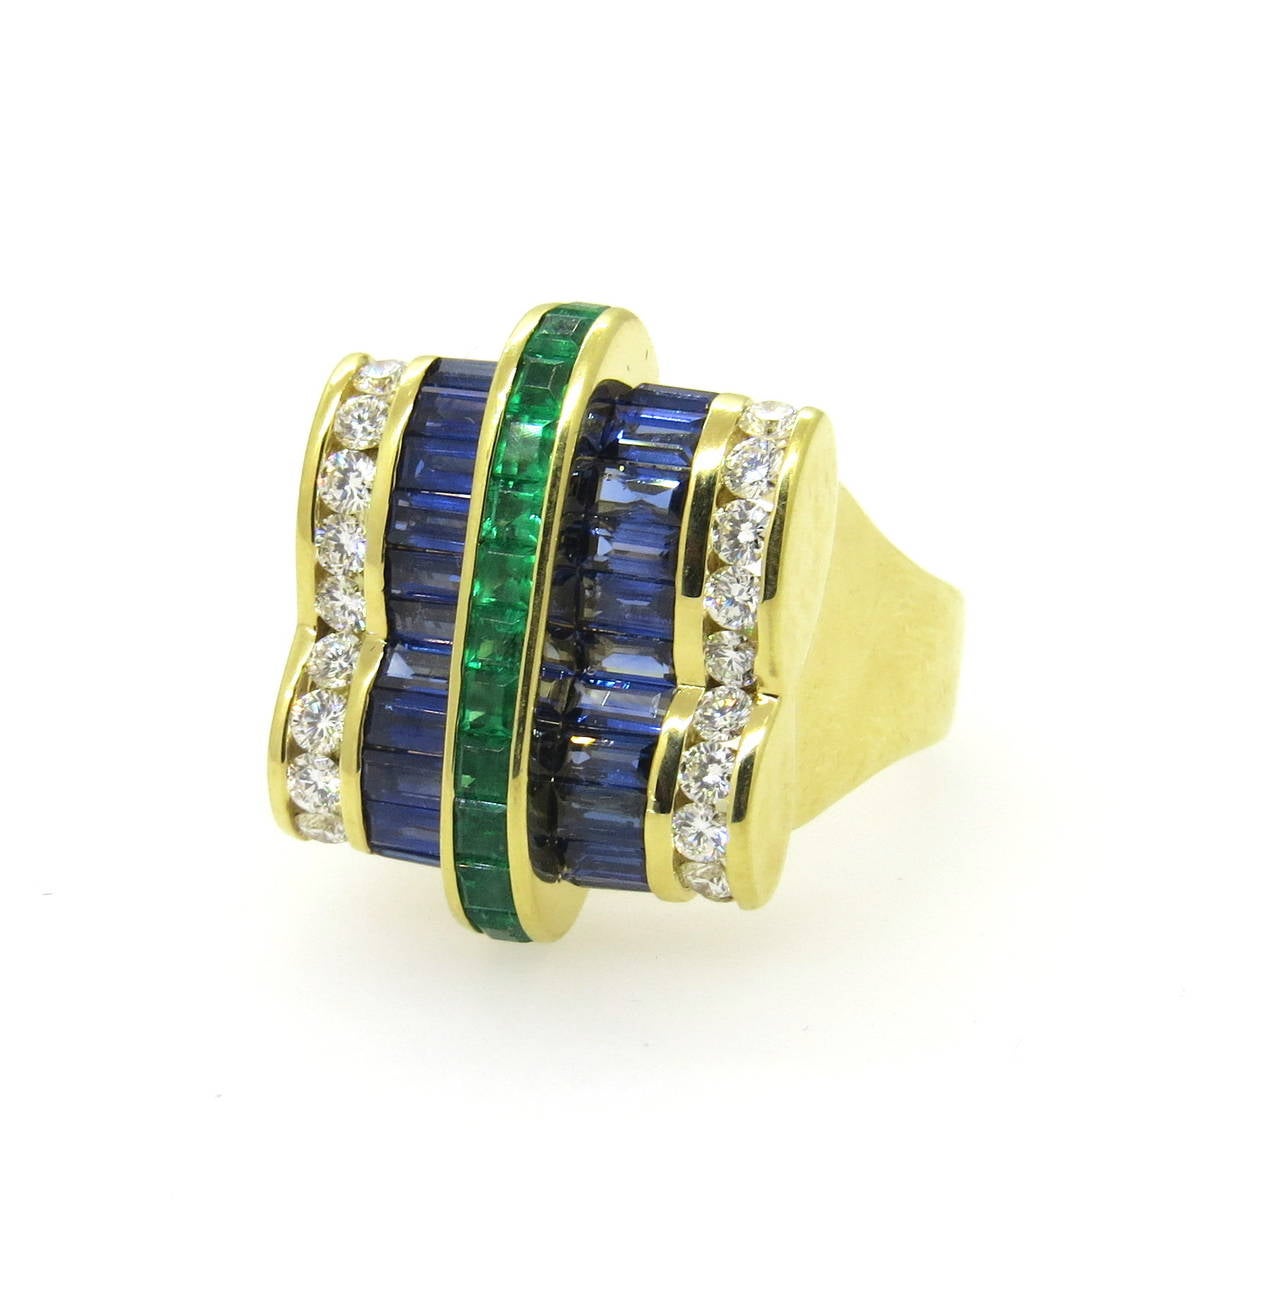 18k gold unusual ring by Krypell, featuring approx. 2.00ctw in baguette sapphires, 1.00ctw in square emerald and 0.80ctw in G/VS diamonds. Ring size 9, ring top is 24mm x 19mm. Marked Krypell 750. Weight - 23.7 grams